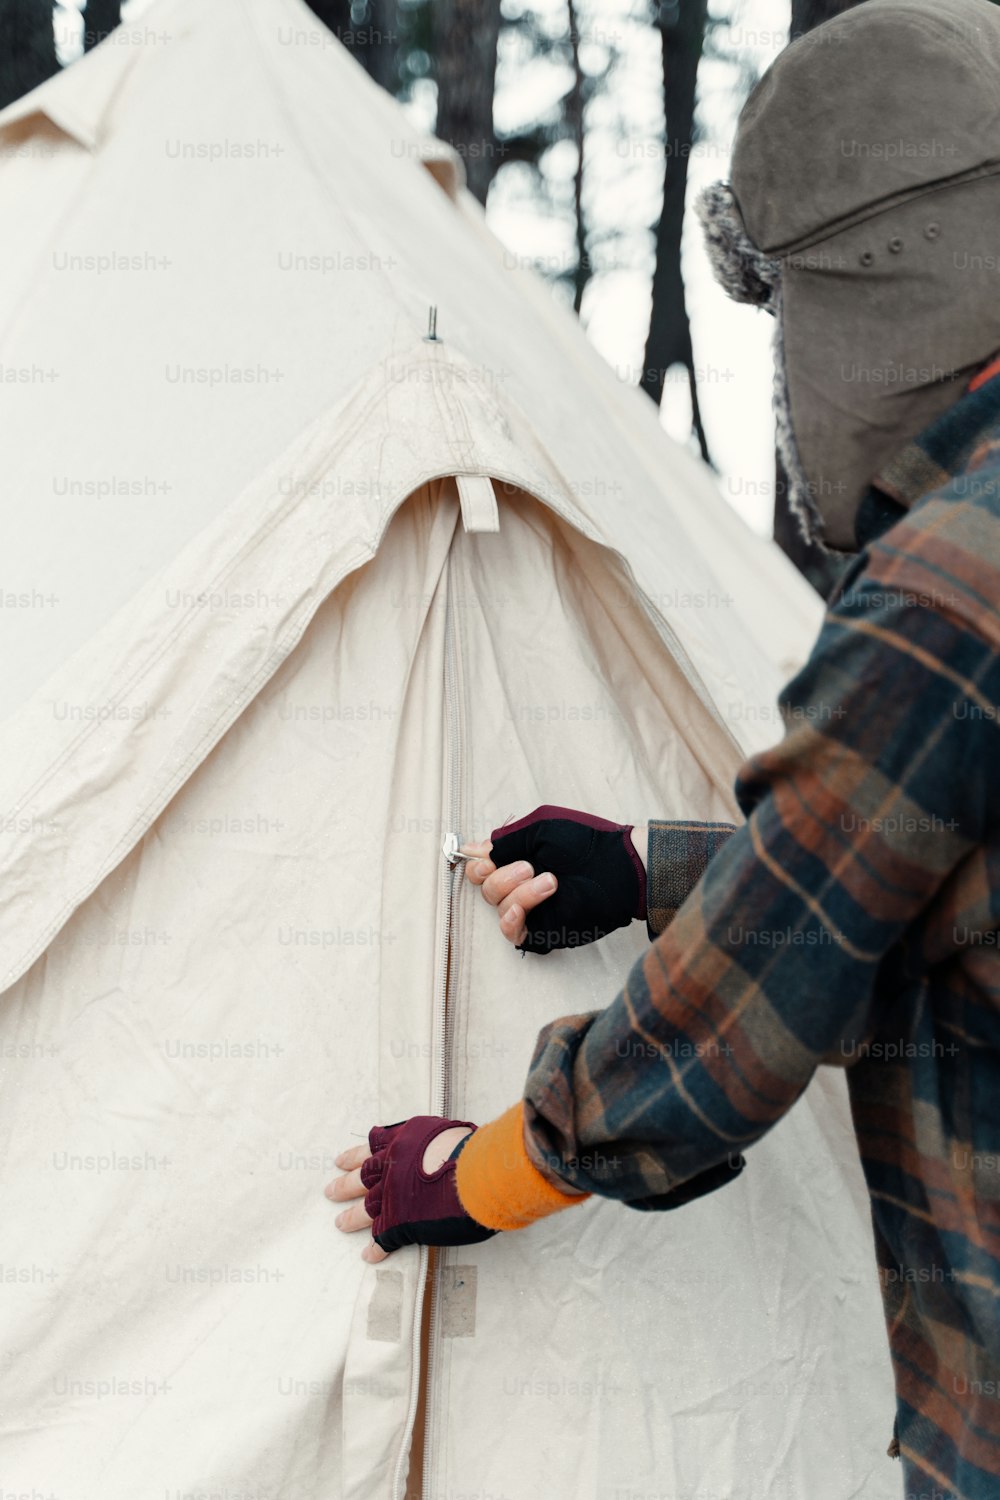 a person wearing gloves putting something in a tent